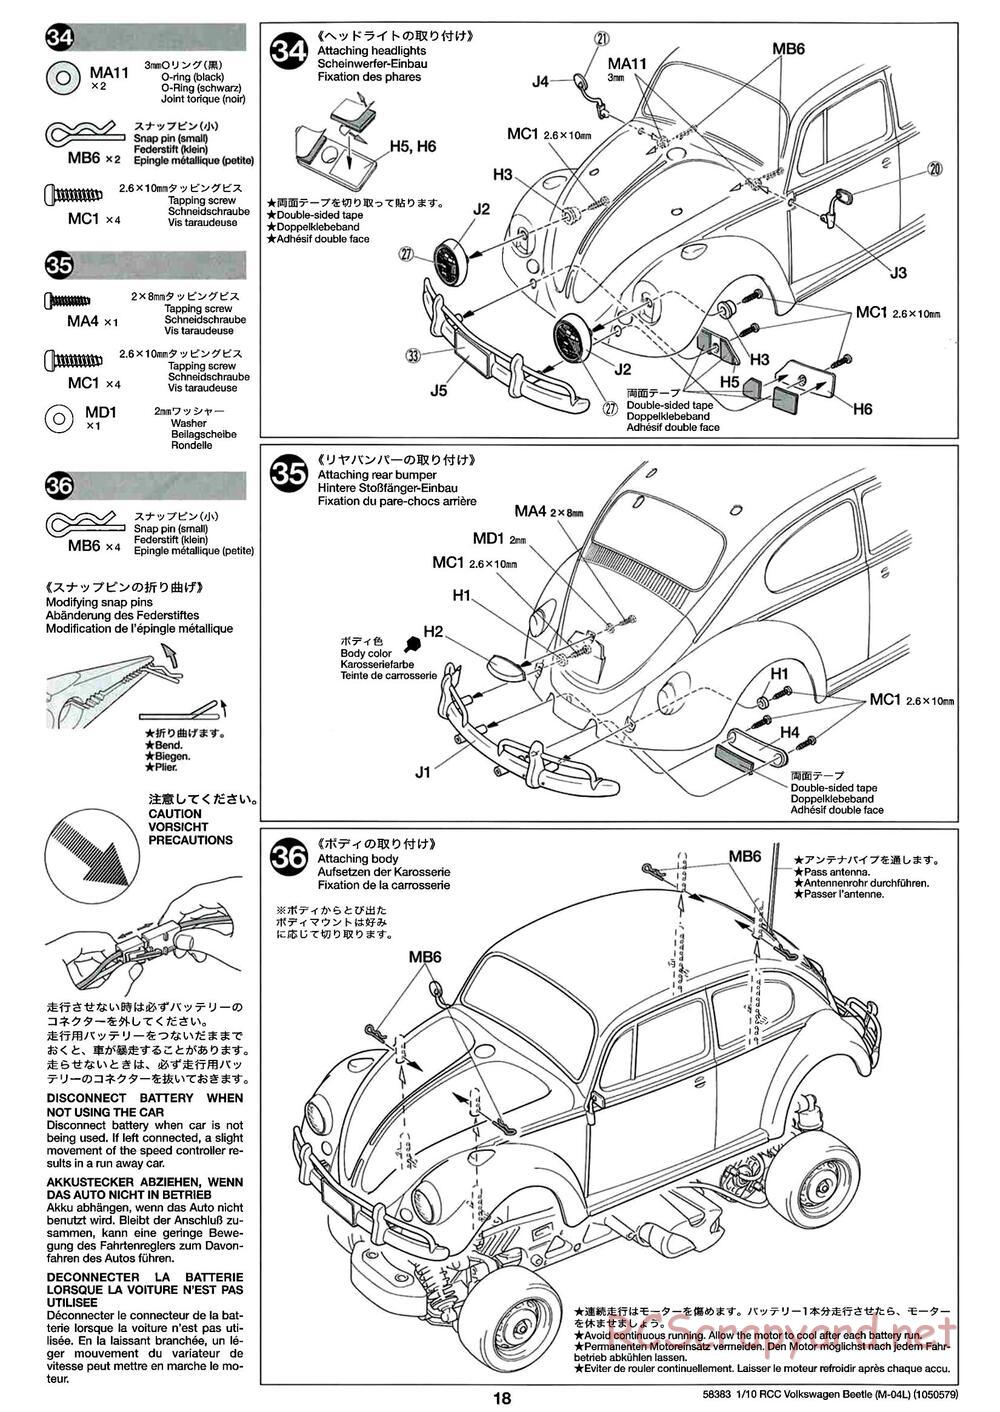 Tamiya - Volkswagen Beetle - M04L Chassis - Manual - Page 18